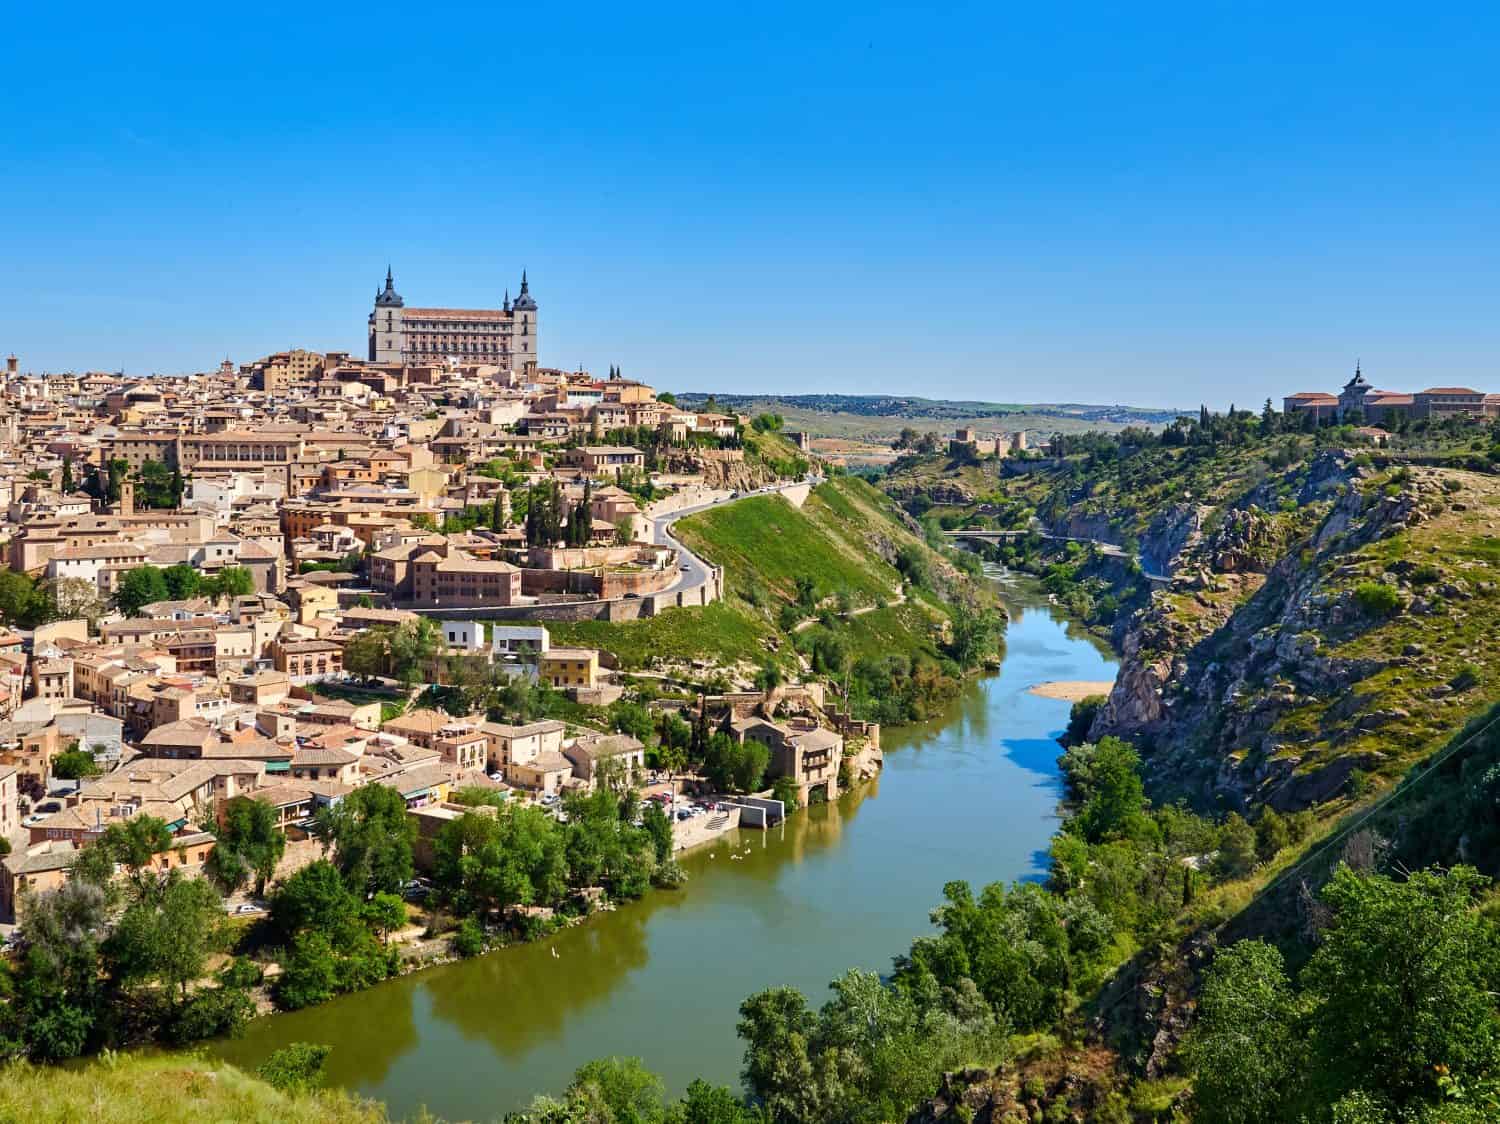 Panoramic view of Toledo with Tagus river and the Alcazar seen from the viewpoint Mirador del Valle. Castilla La Mancha, Spain, Europe